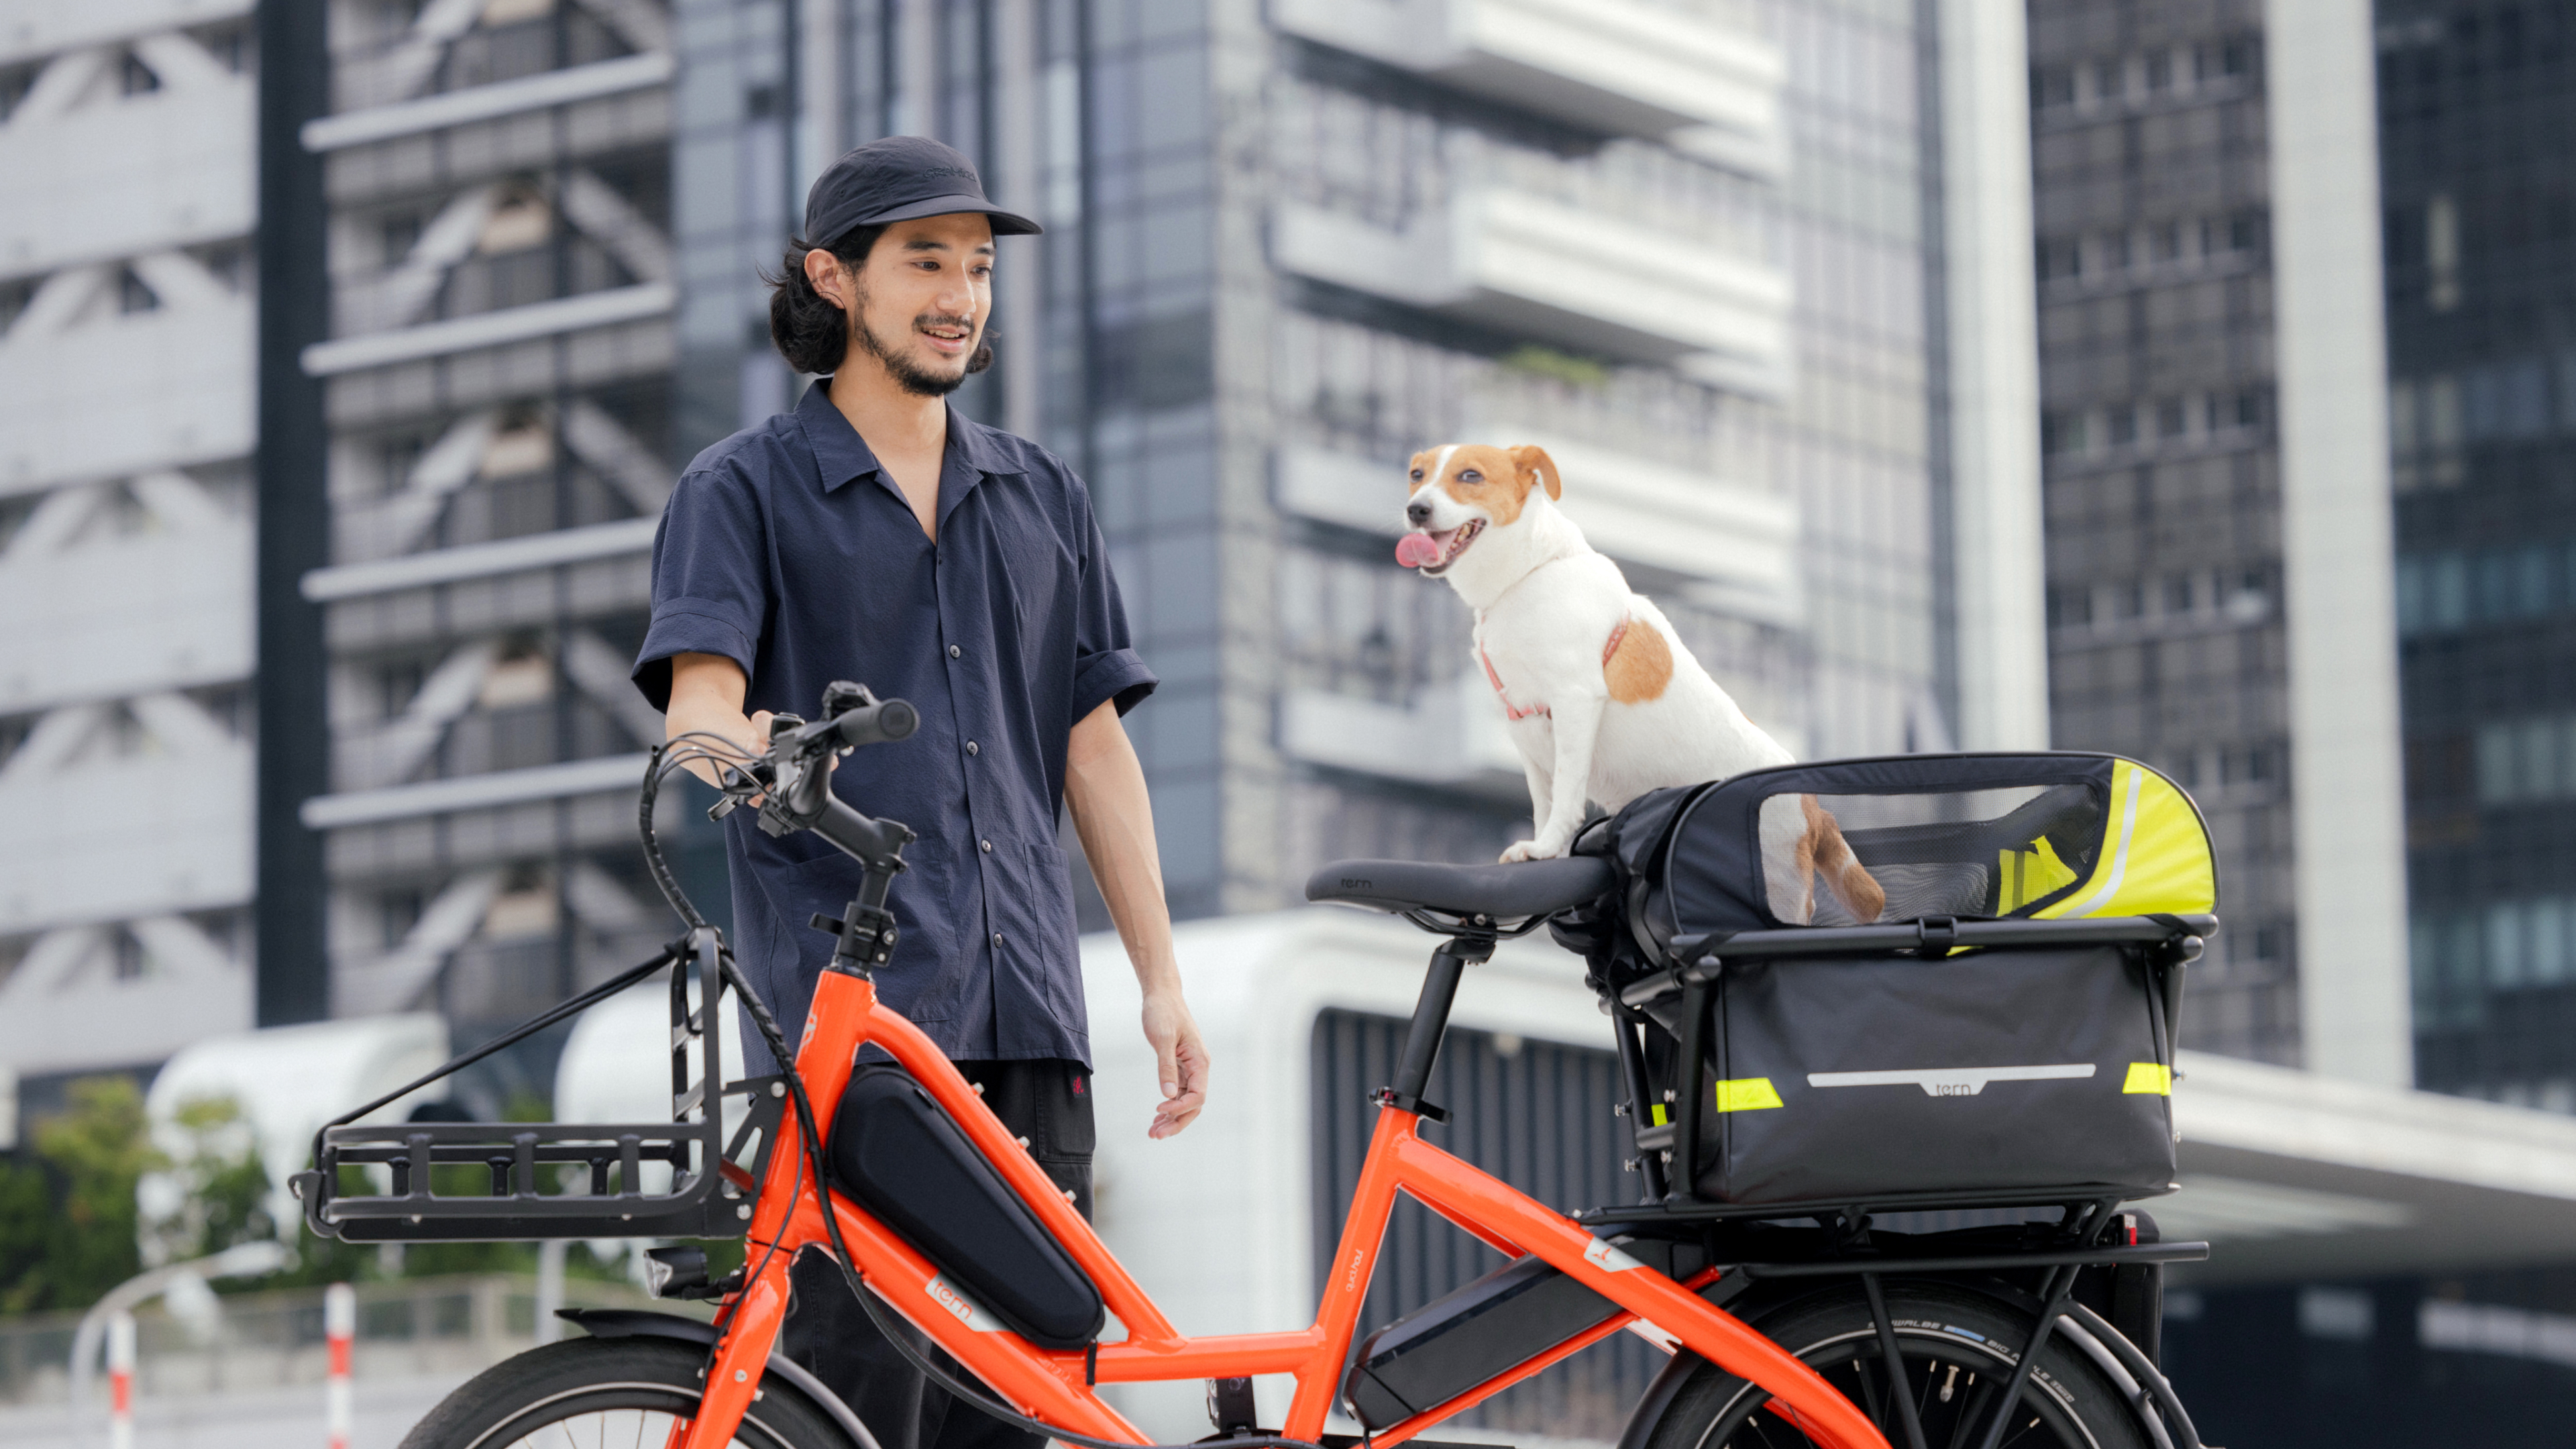 A man riding Quick Haul with the dog in the rear rack